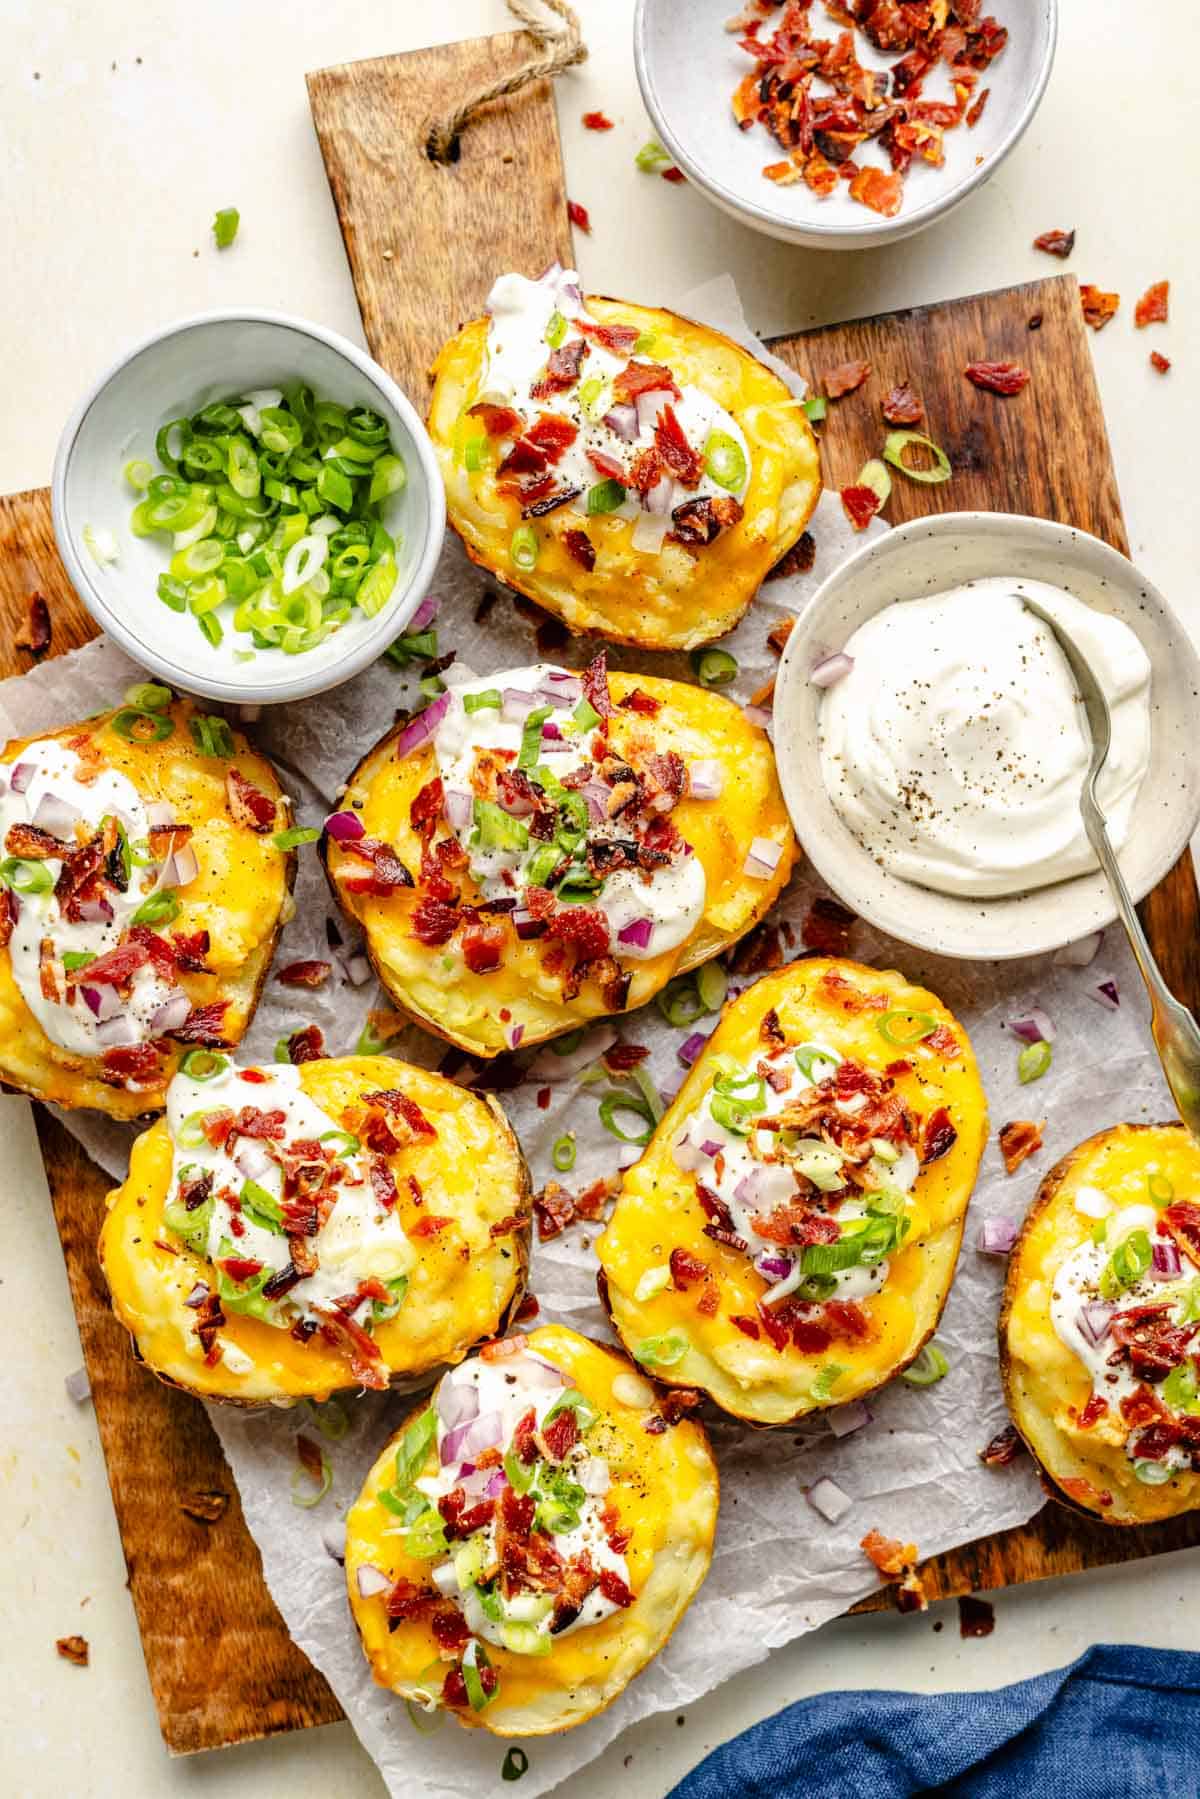 bacon, green onions and sour cream are presented in small dishes next to twice baked potatoes